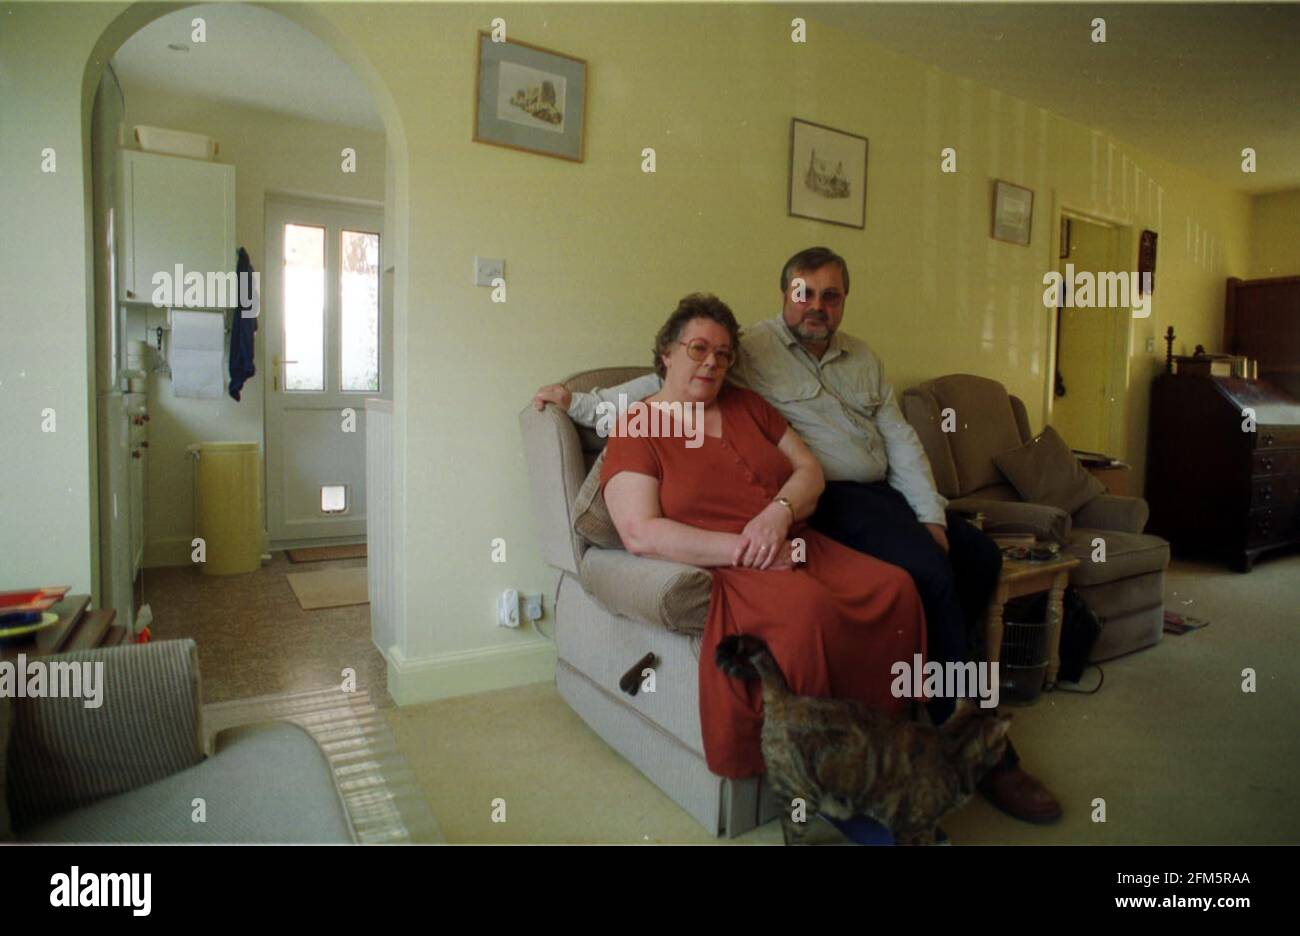 Paul And Molly Mockford In Their House In Orchard Road Lewes Which Has Been Redecorated Following The Floods 7 5 01 Pic J0hn Voos Stock Photo Alamy